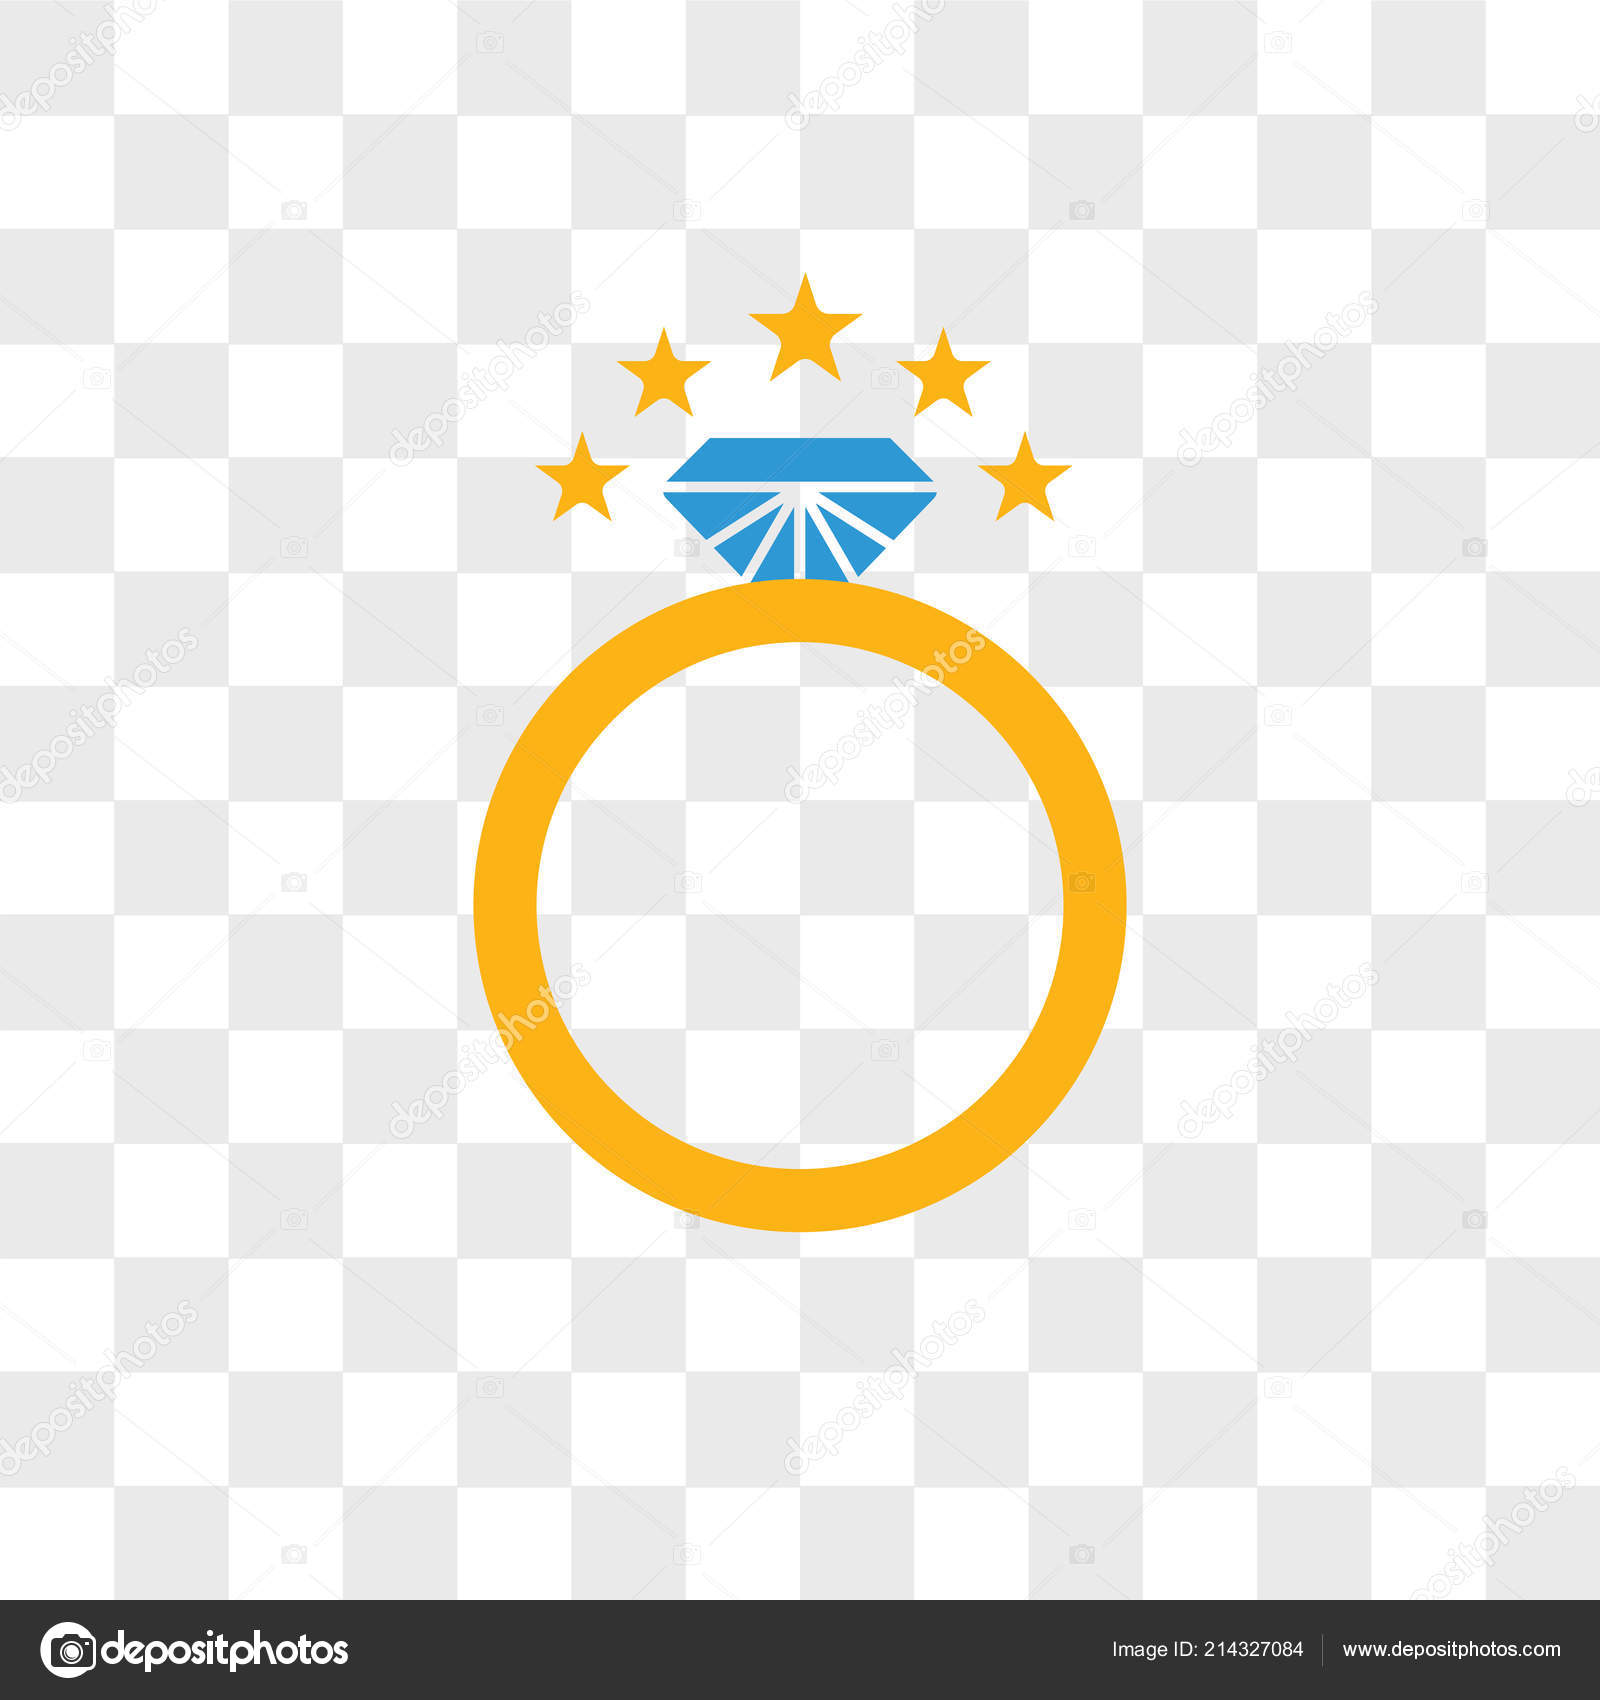  Ring  vector icon isolated on transparent background Ring  